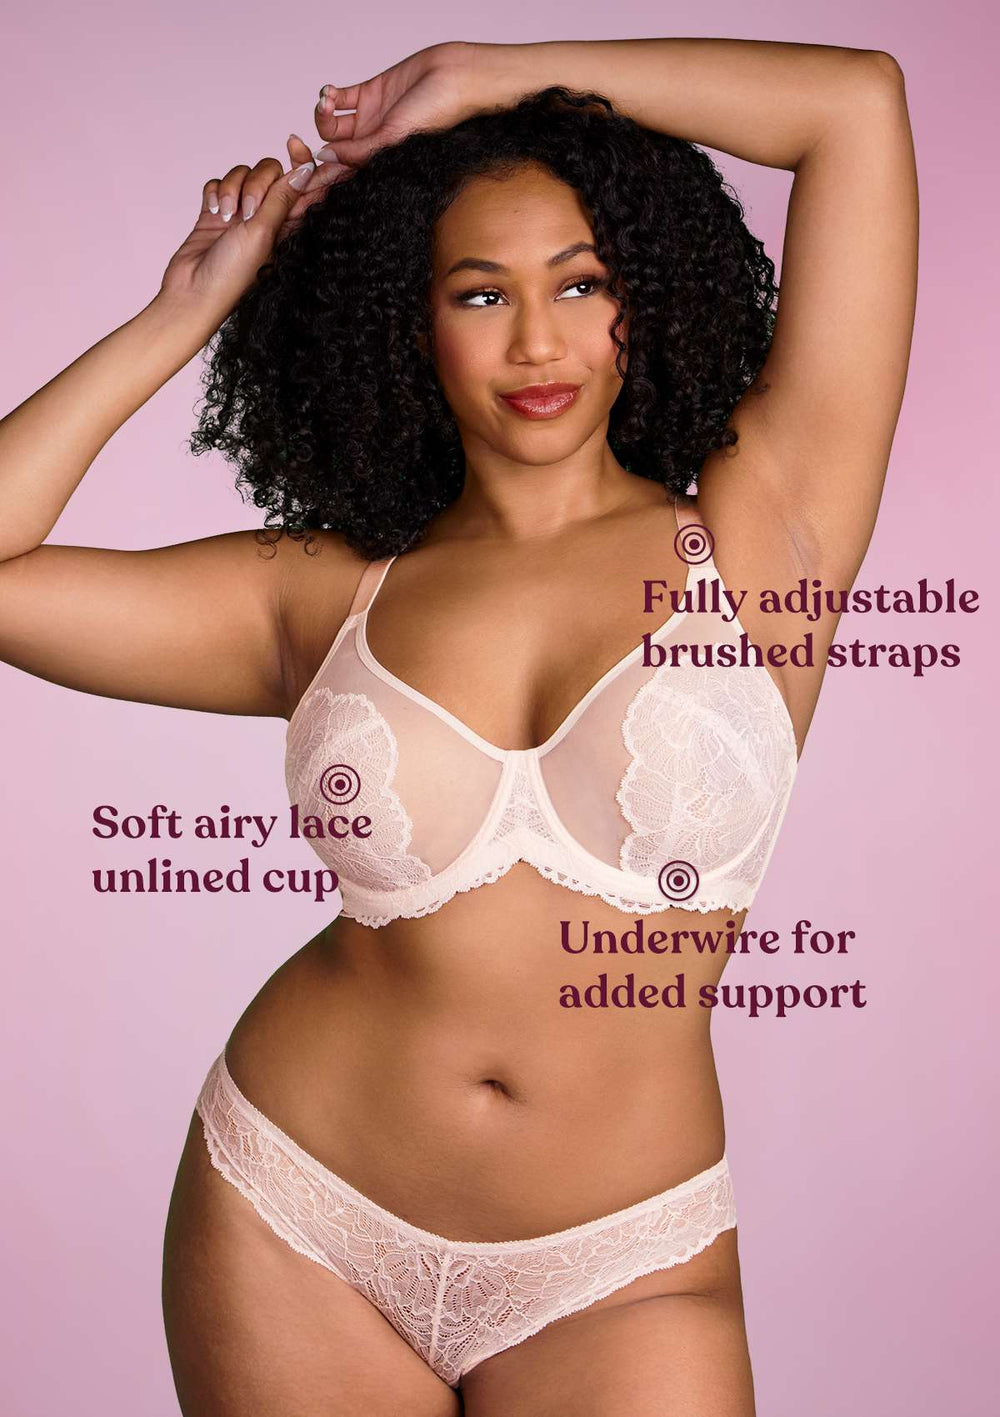 Brushed-back lace for the softest touch. Sensual lingerie with a